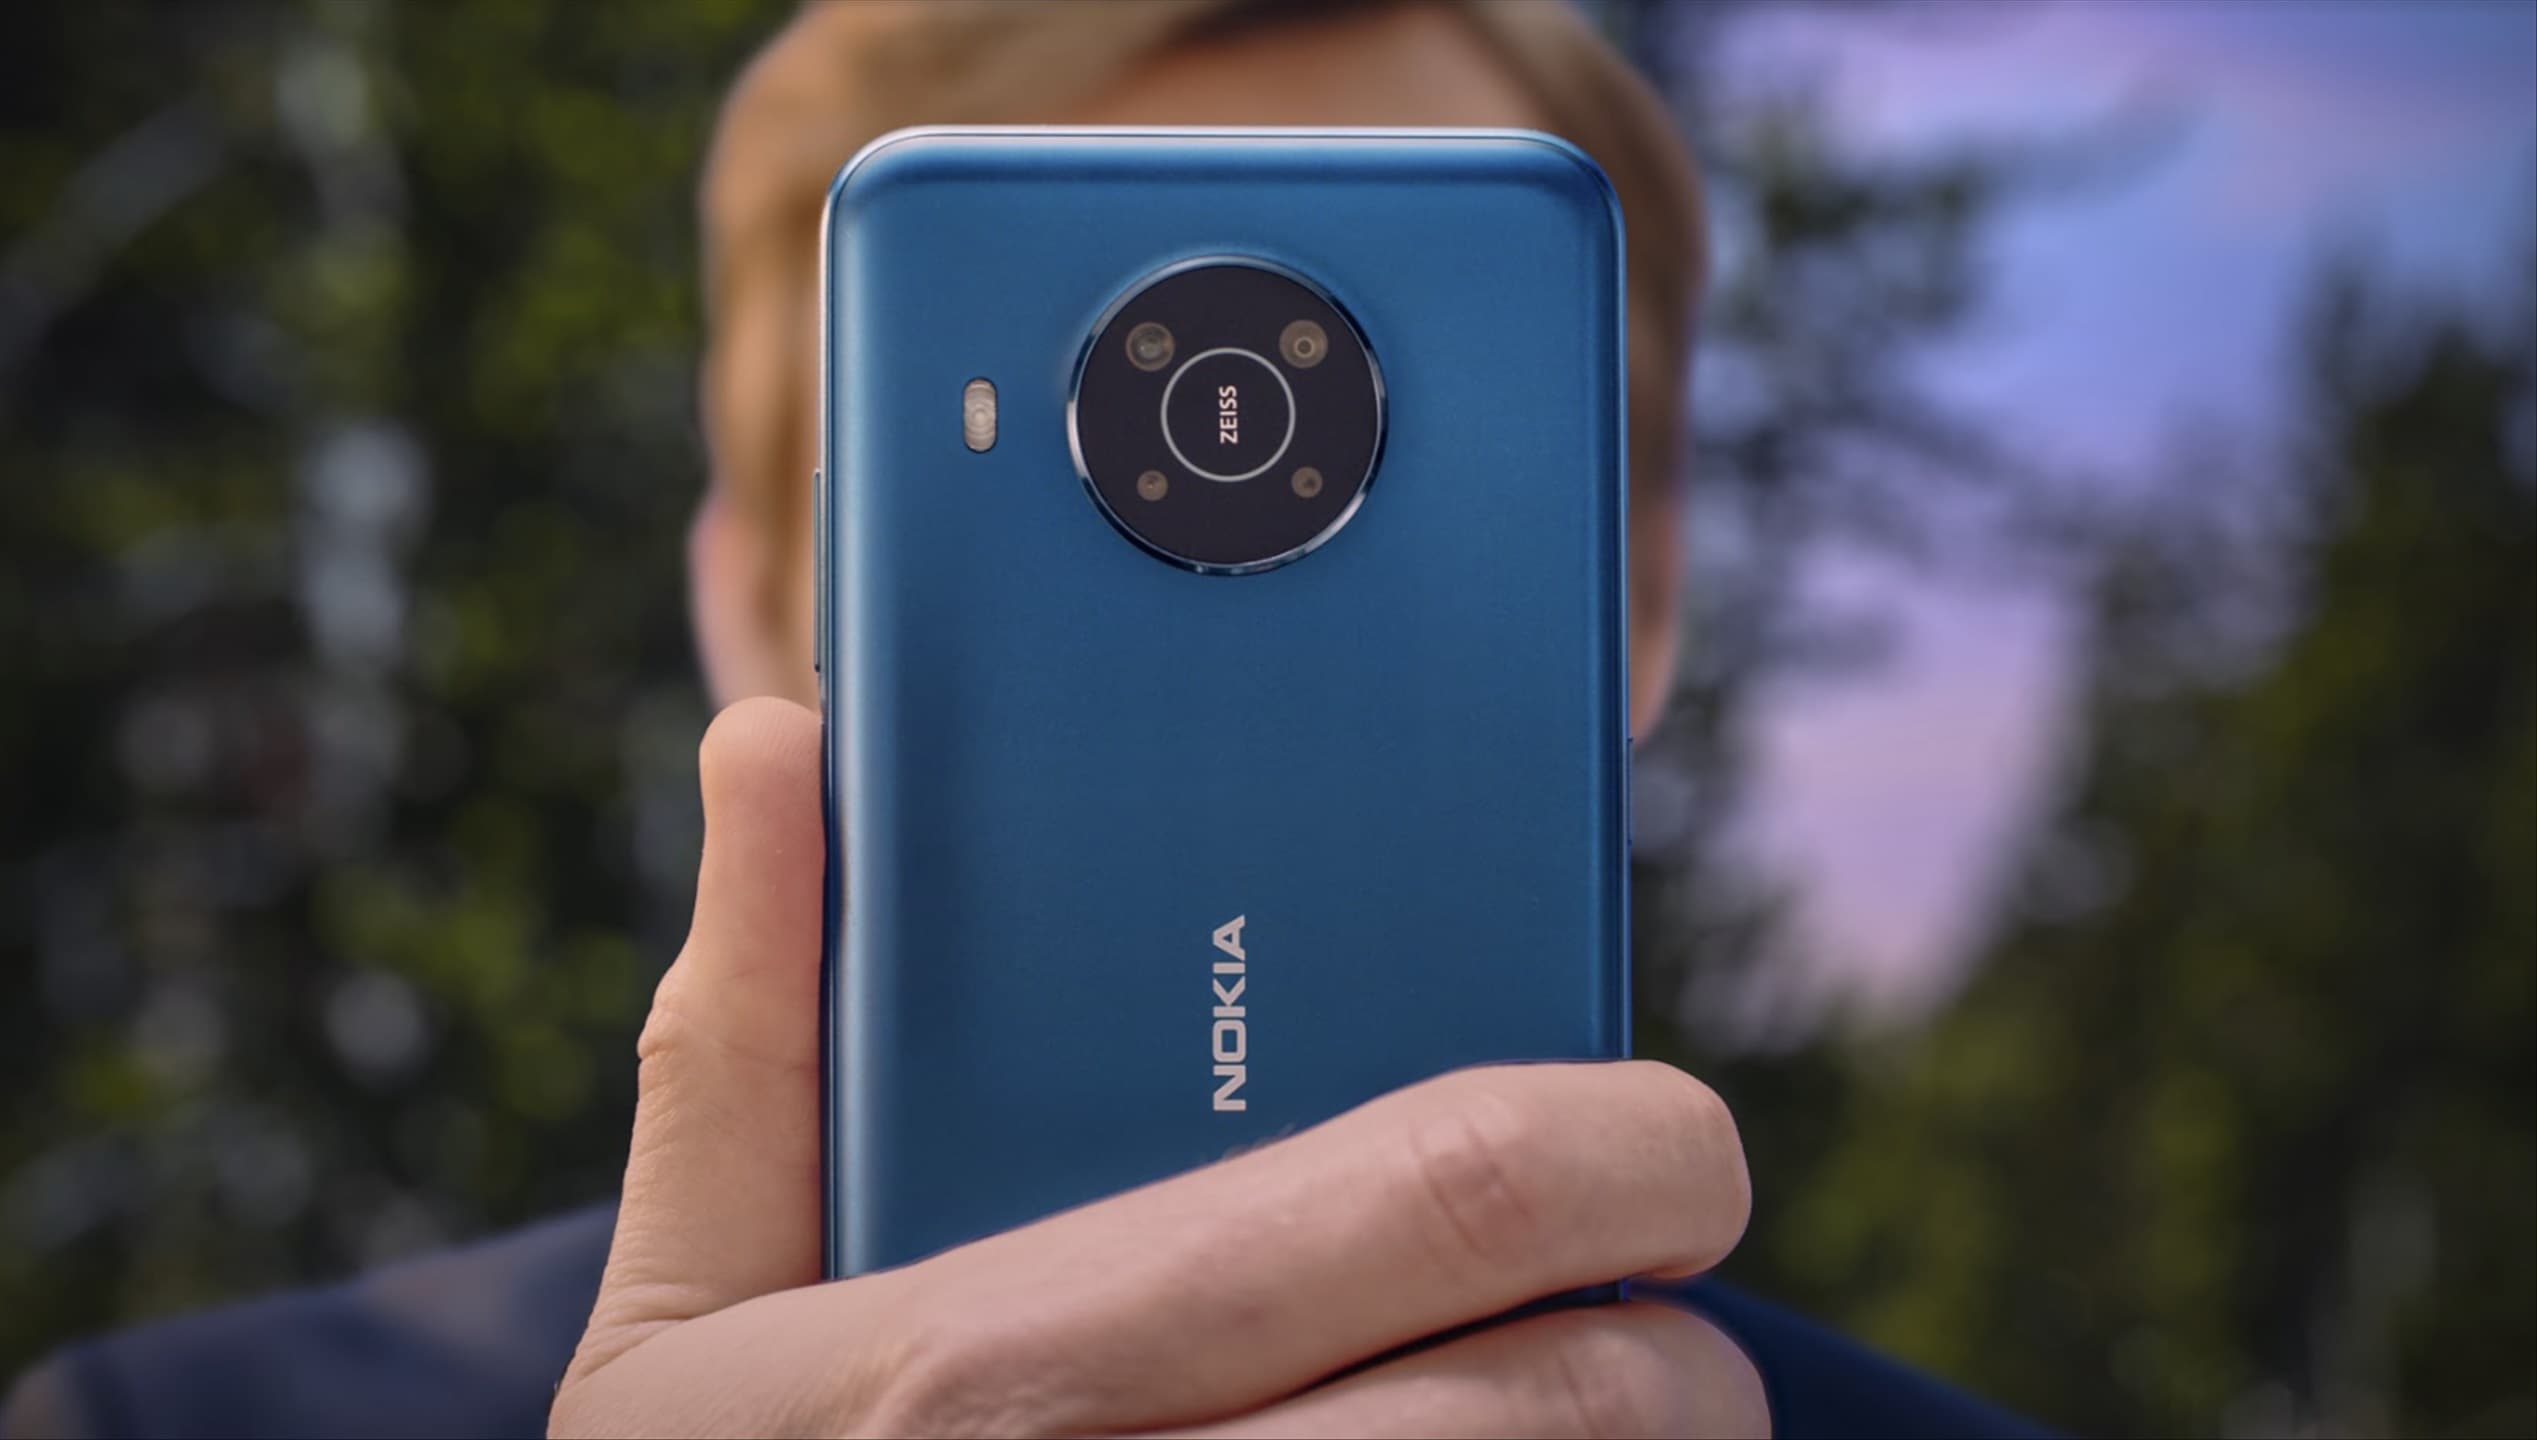 Nokia releases a new mid-range phone with ZEISS Optics quad camera system